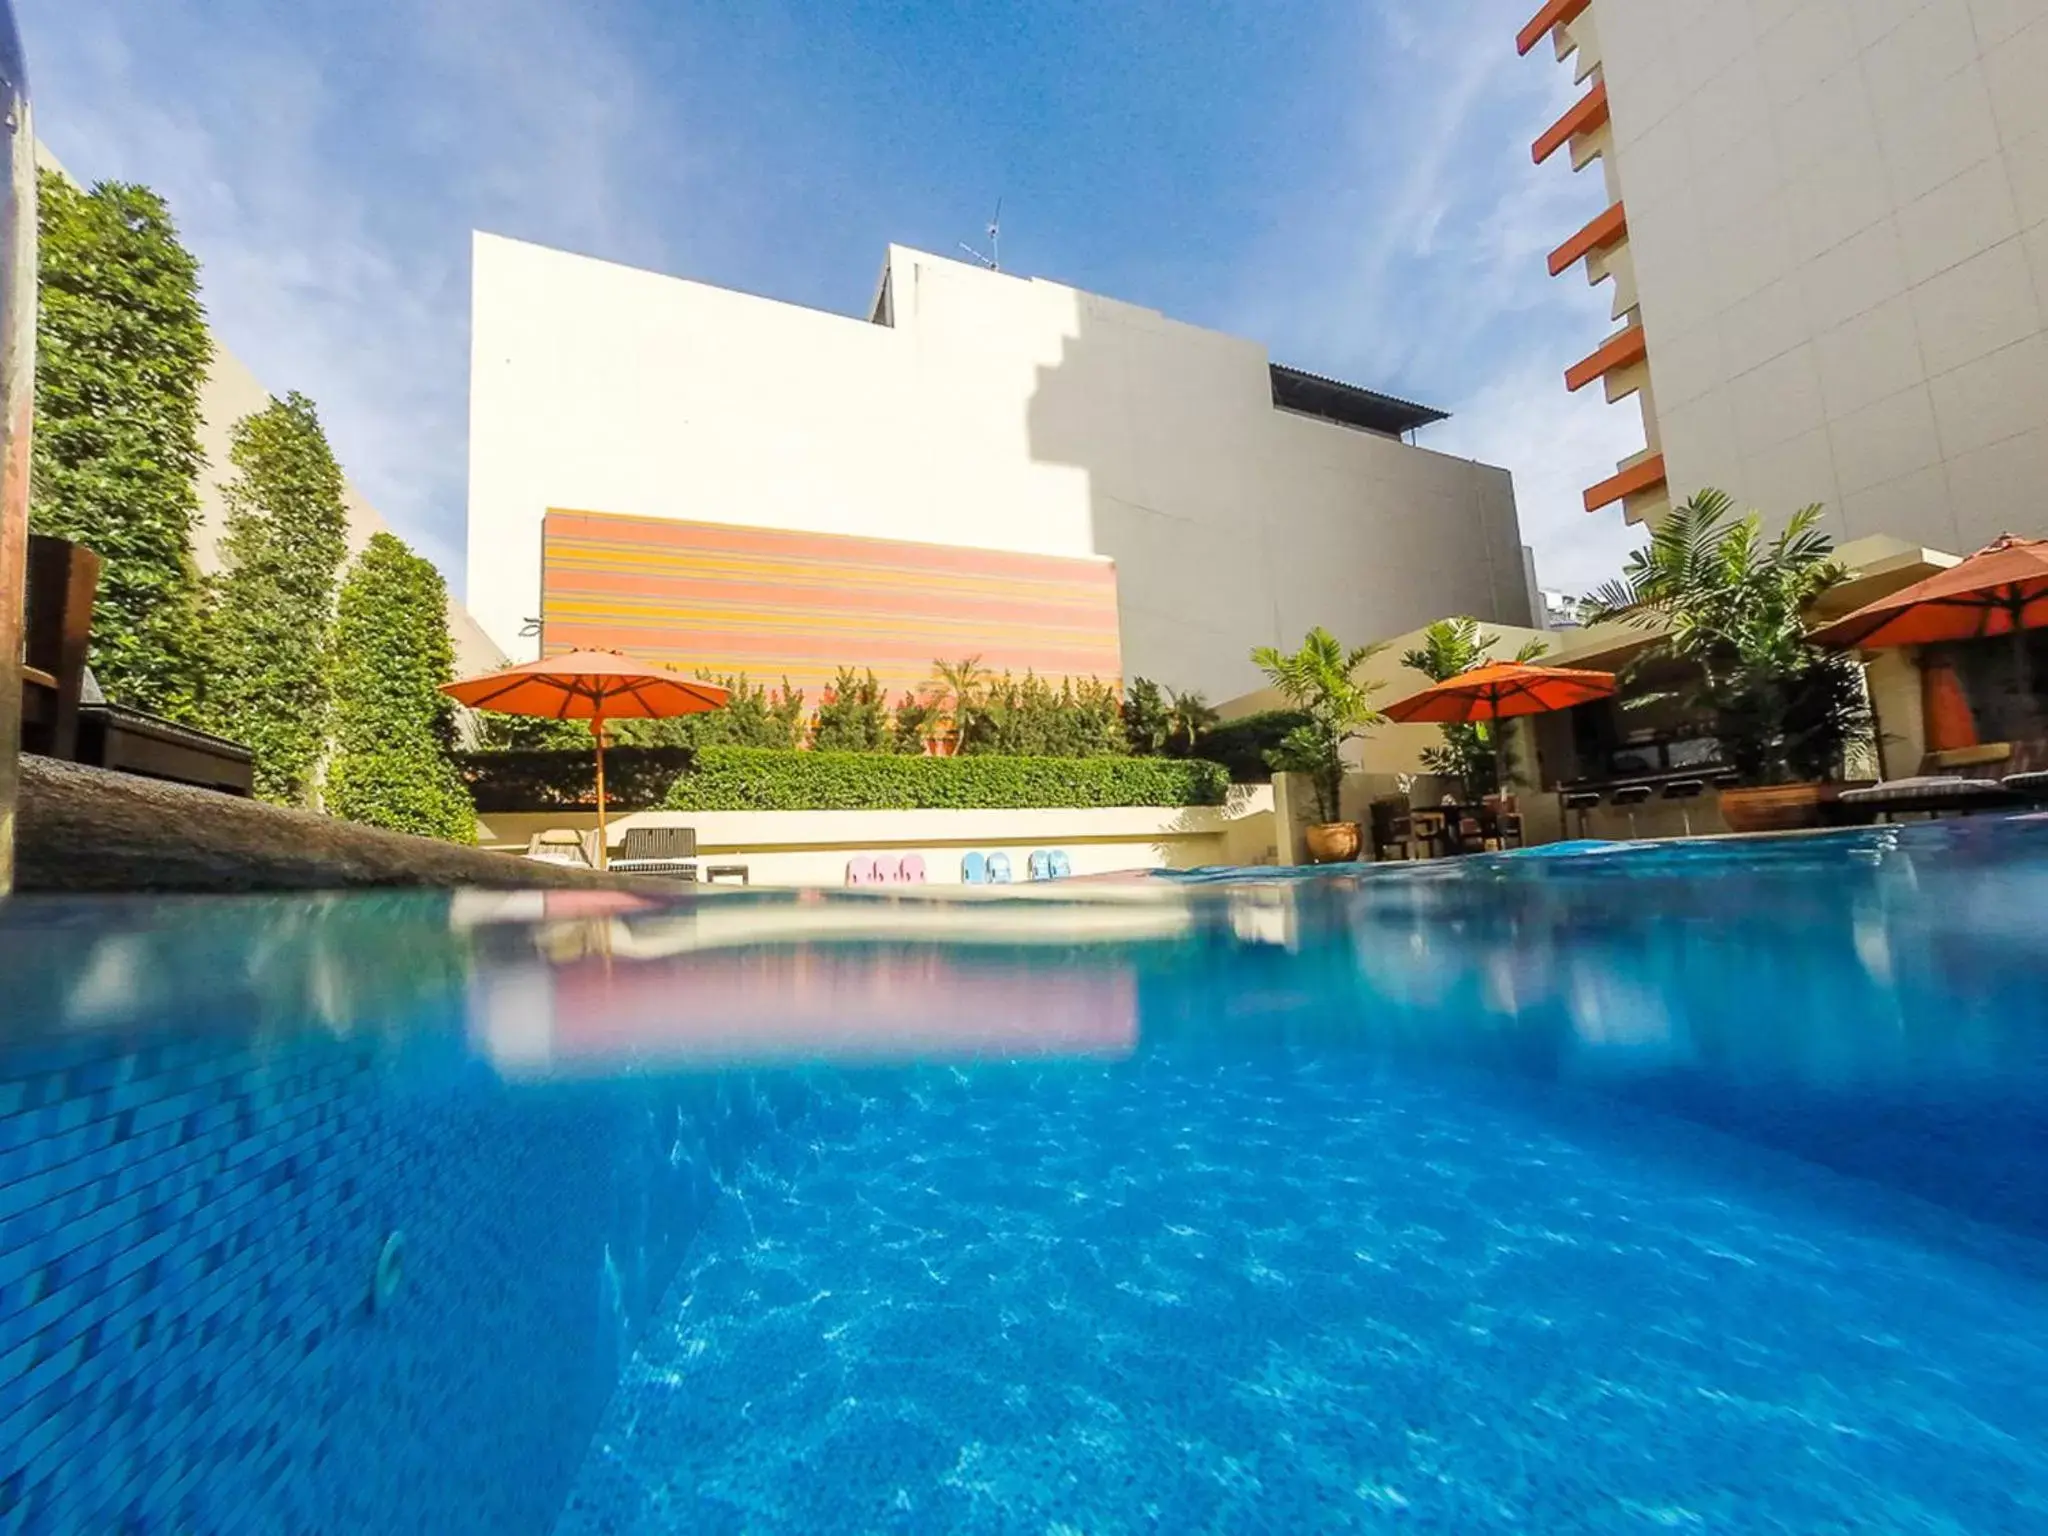 Swimming pool, Property Building in dusitD2 Chiang Mai